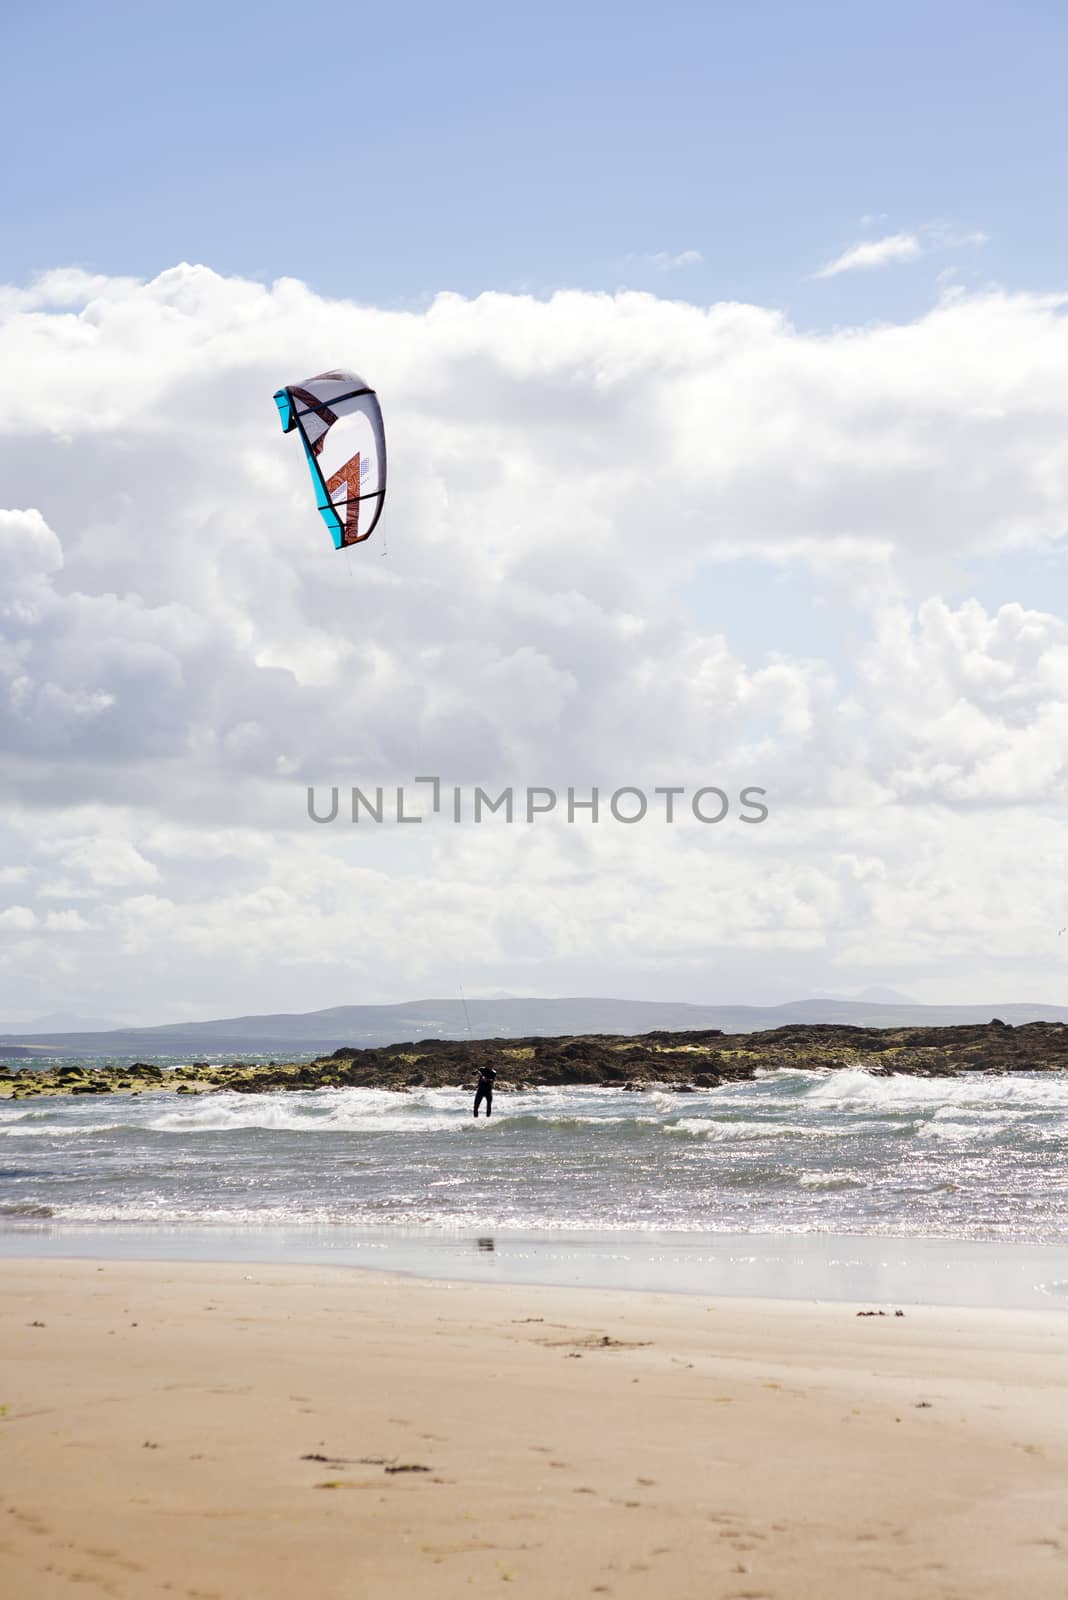 fast kite surfer on beautiful waves at beach in ballybunion county kerry ireland on the wild atlantic way